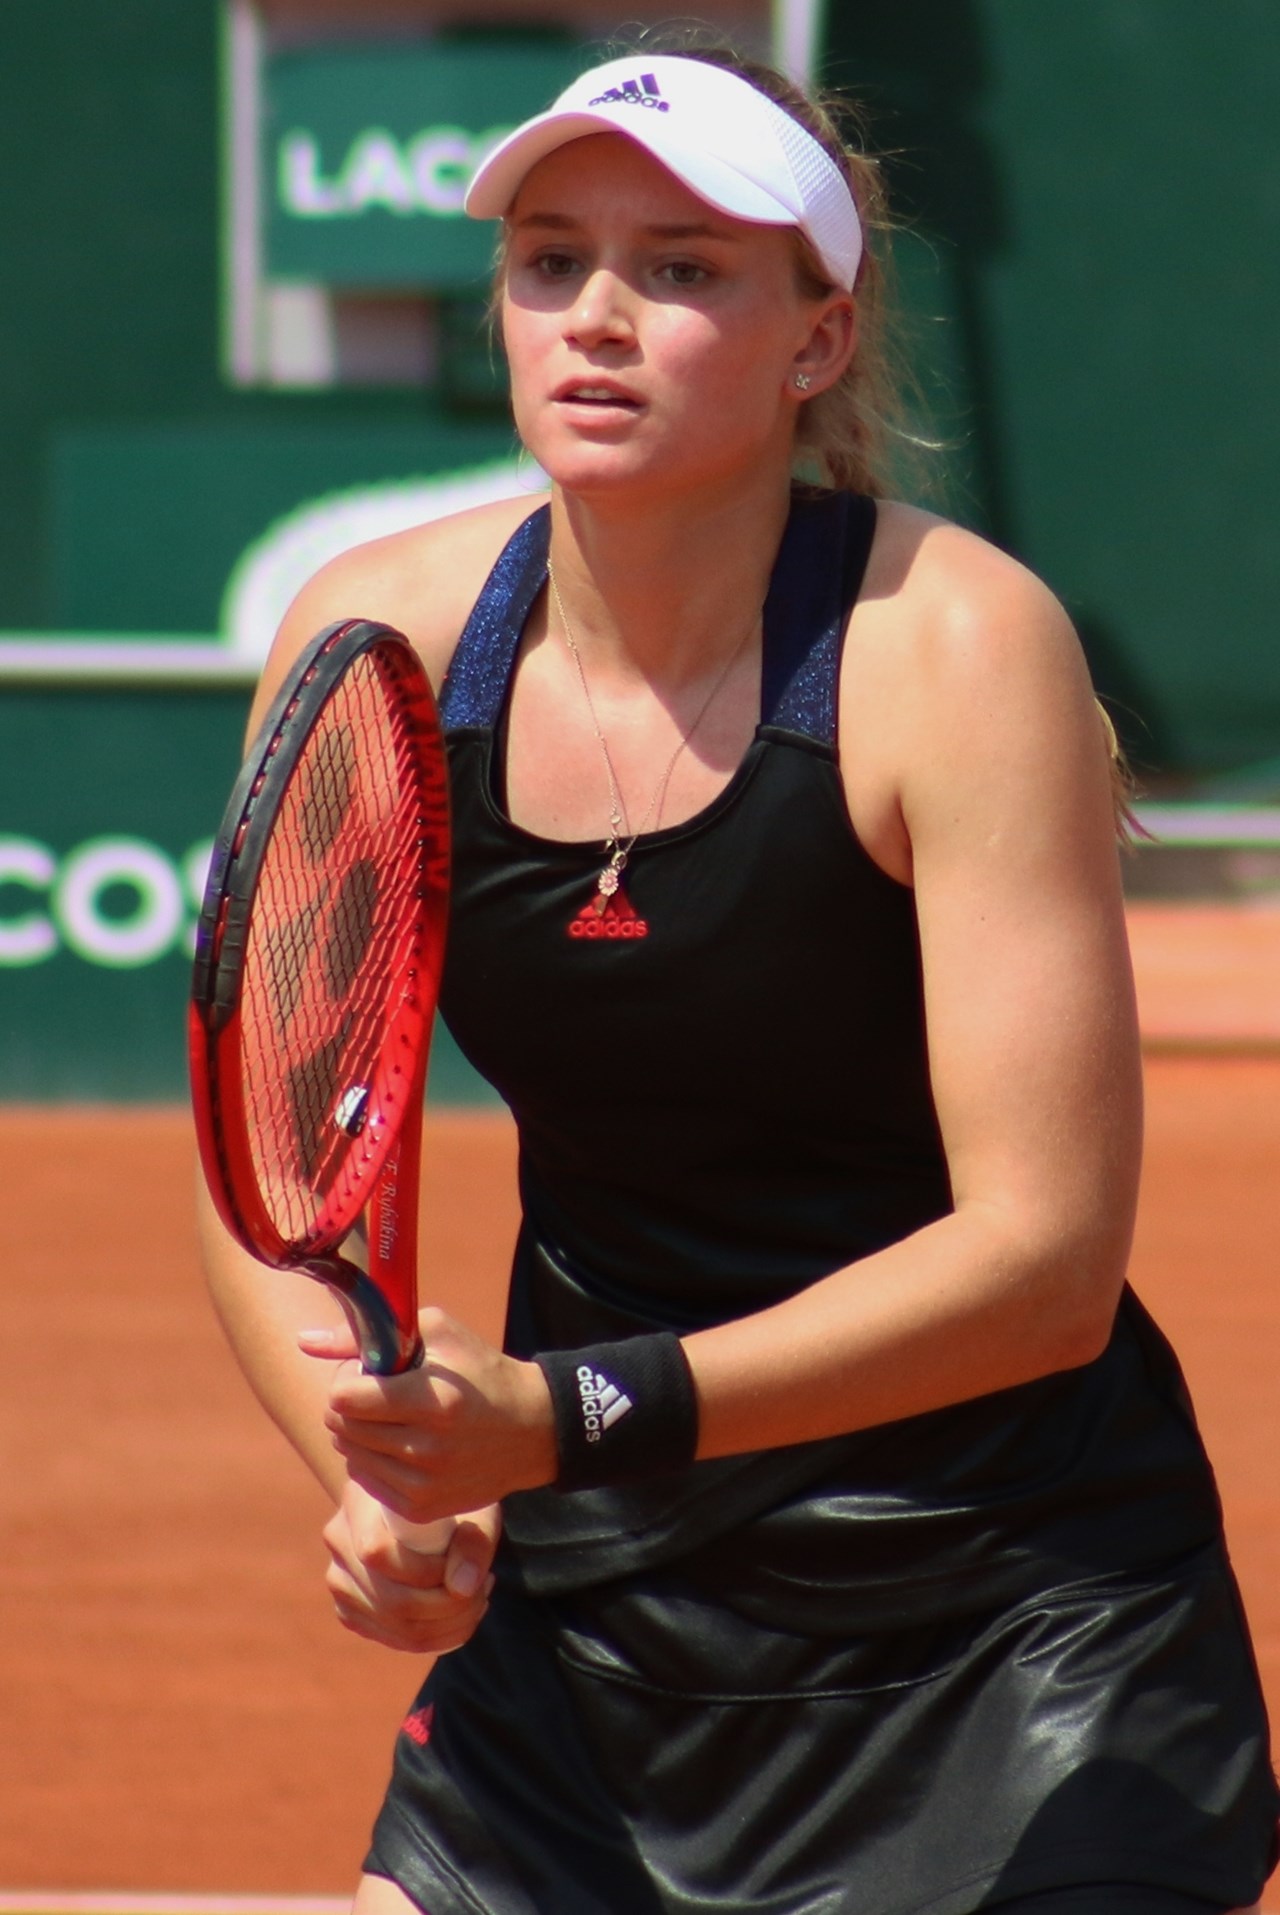 Tennis-Rybakina wins Rome title after ailing Kalinina retires; Soccer-Arsenal must look in the mirror and own up to mistakes, says Ramsdale and more